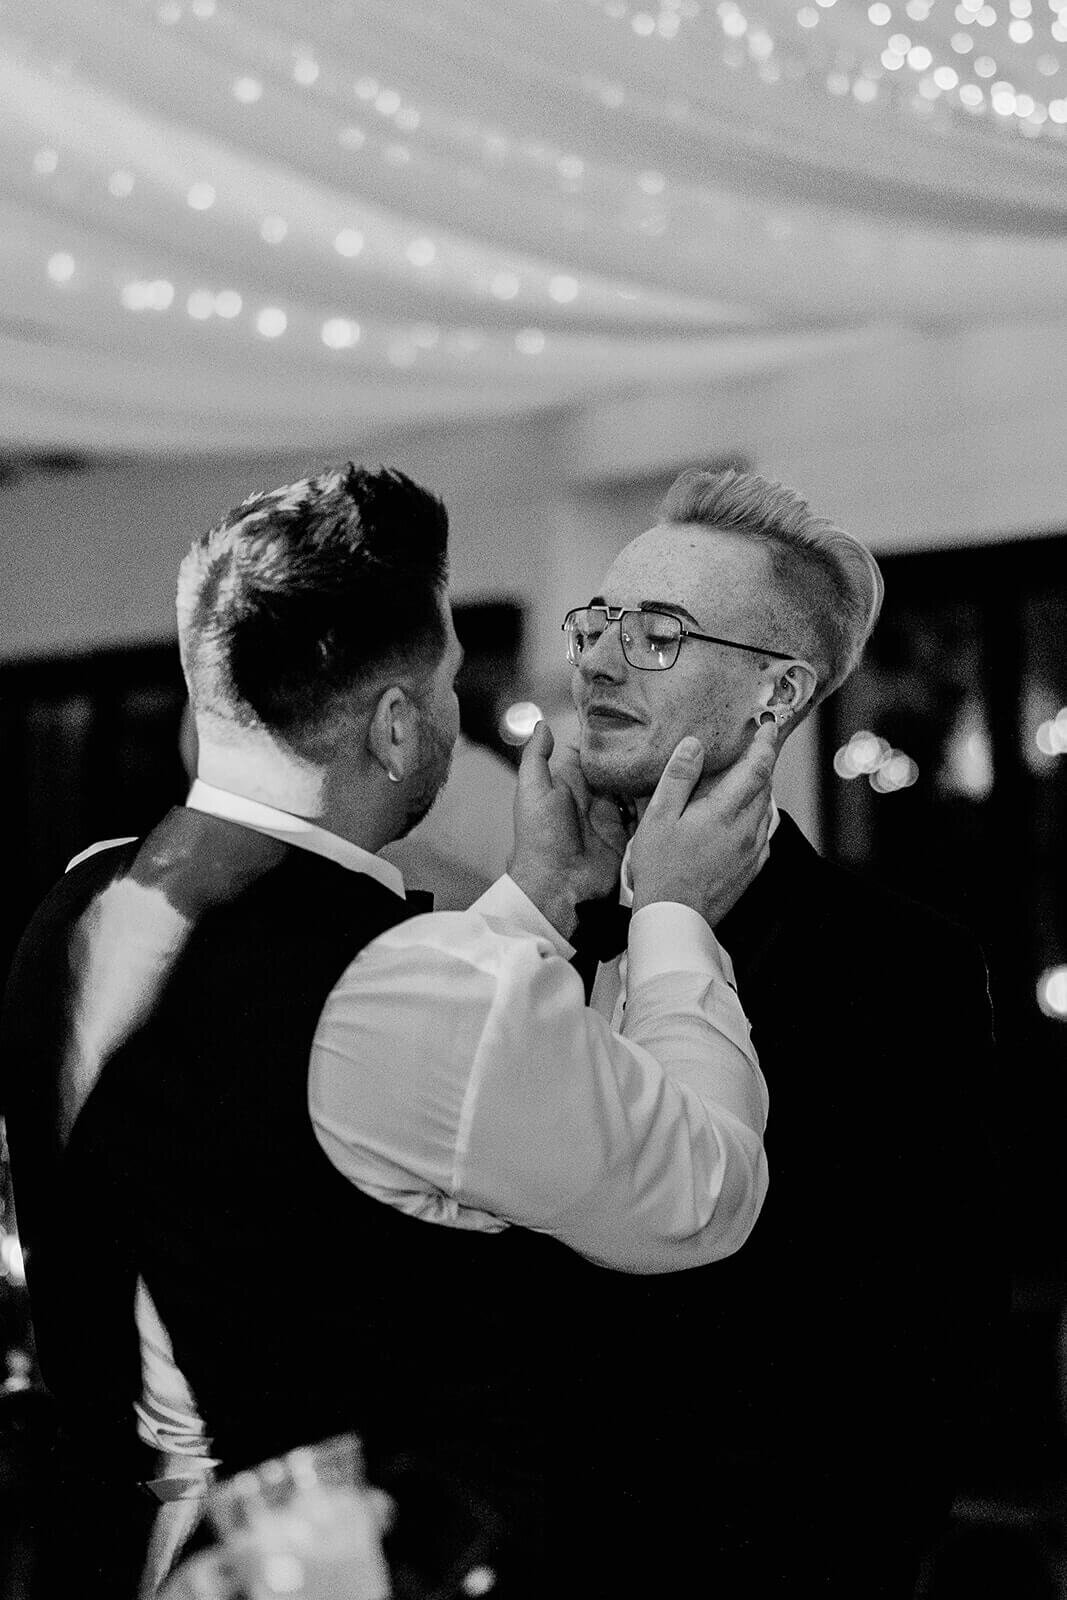 two grooms dancing at wedding reception